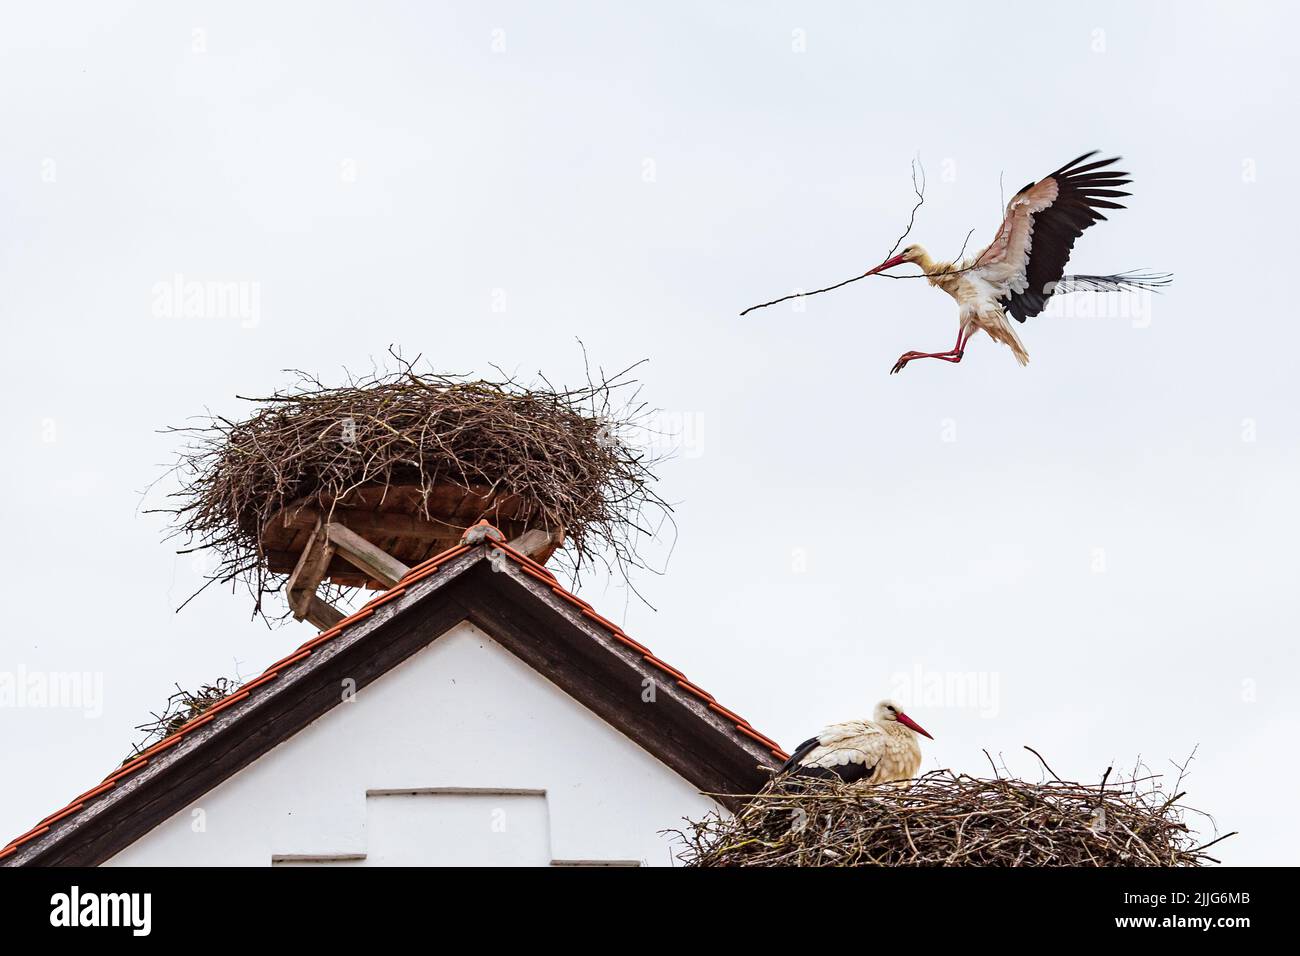 White stork Ciconia ciconia in the landing approach to the nest with building material, Salem, Germany Stock Photo